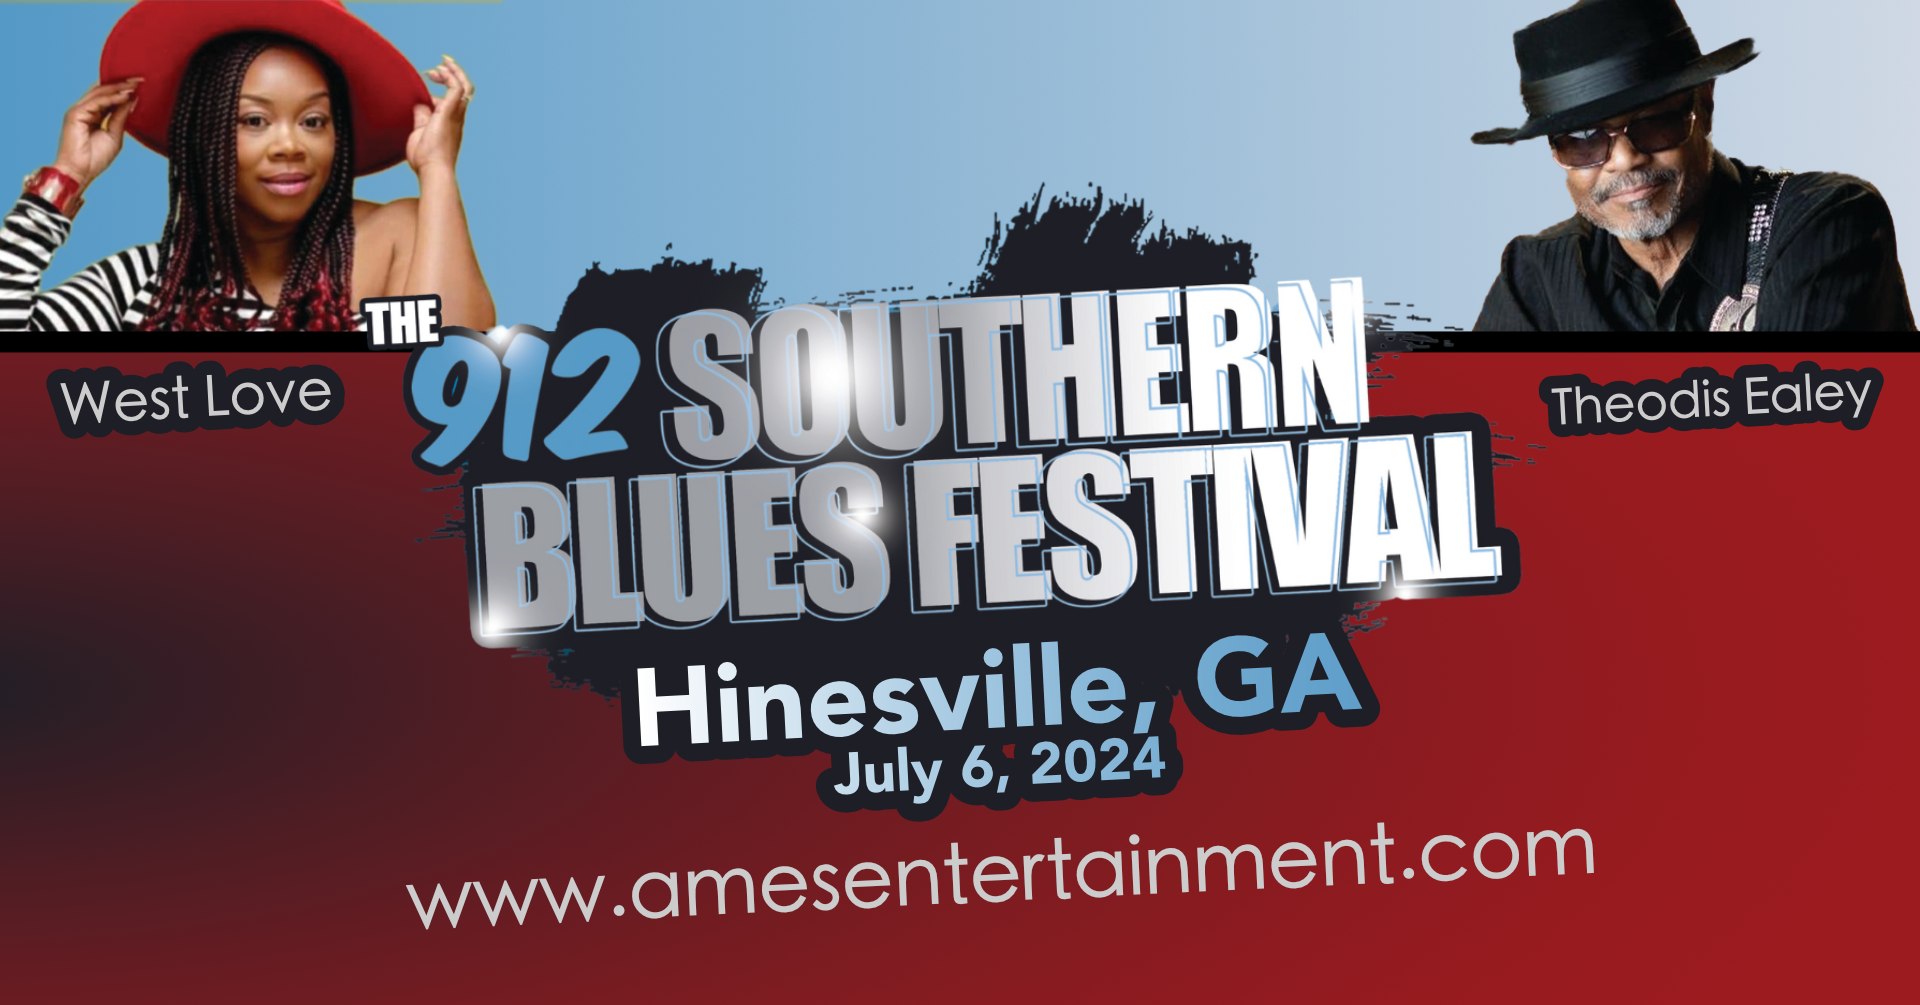 912 Southern Blues Festival Contest Rules